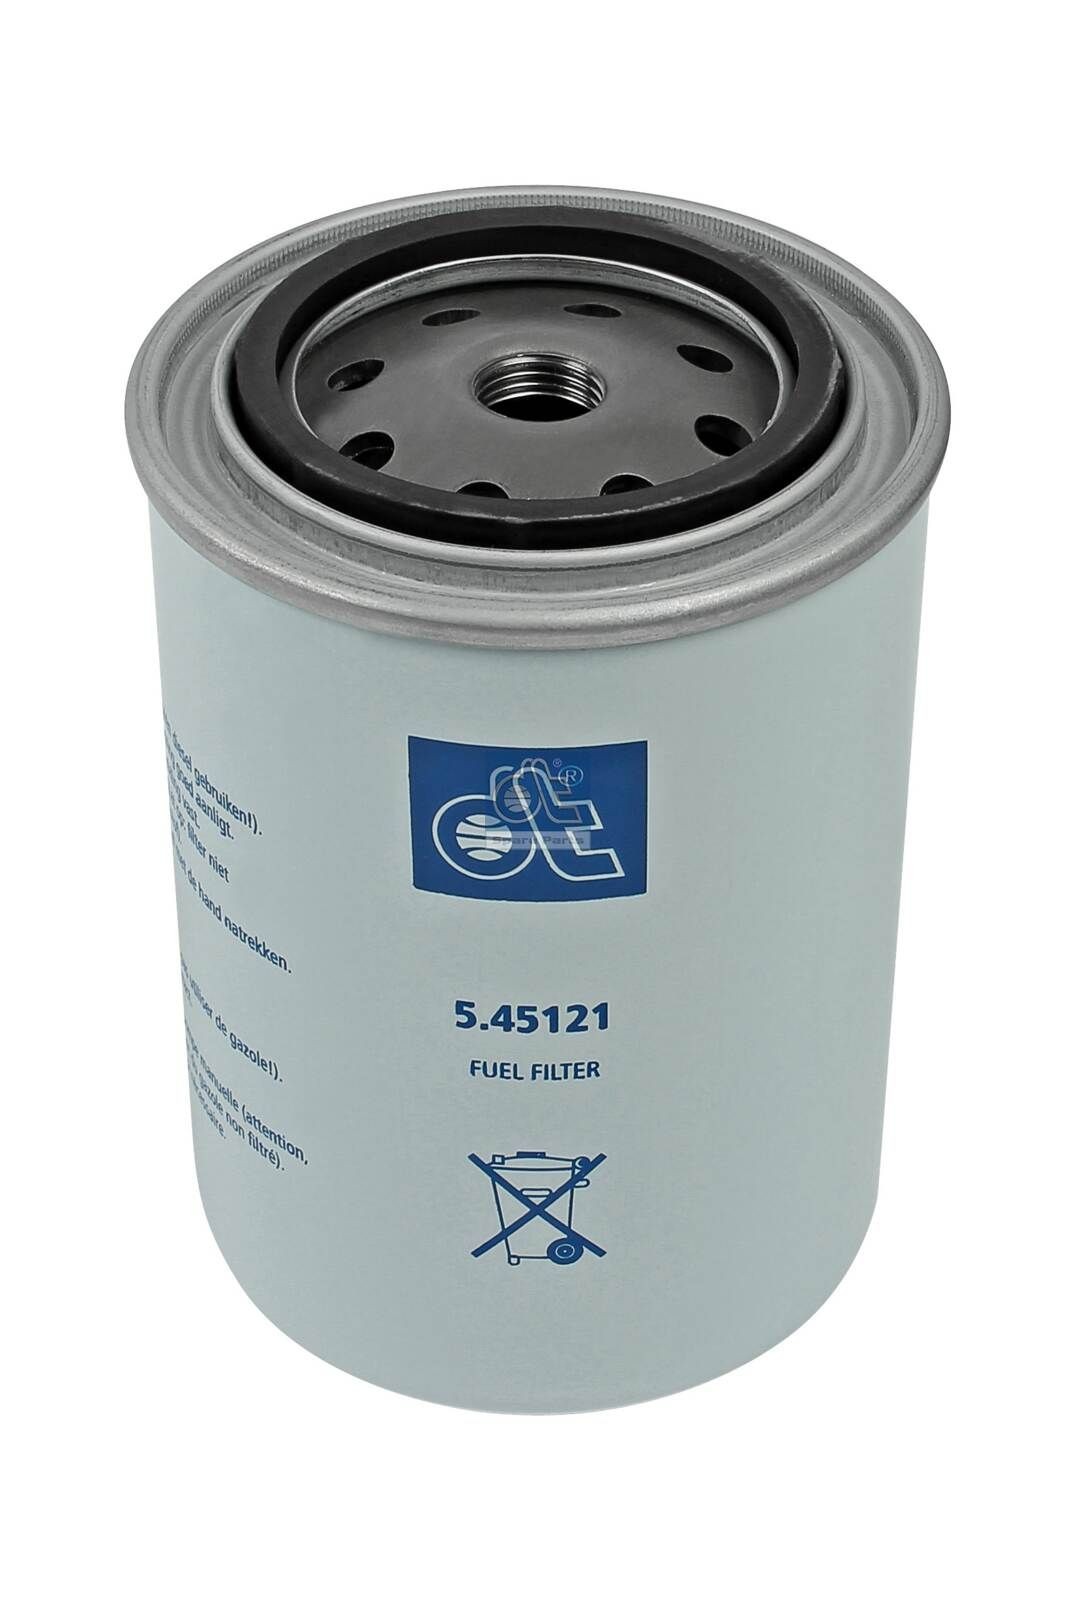 WDK 940/5 DT Spare Parts 5.45121 Fuel filter 131869